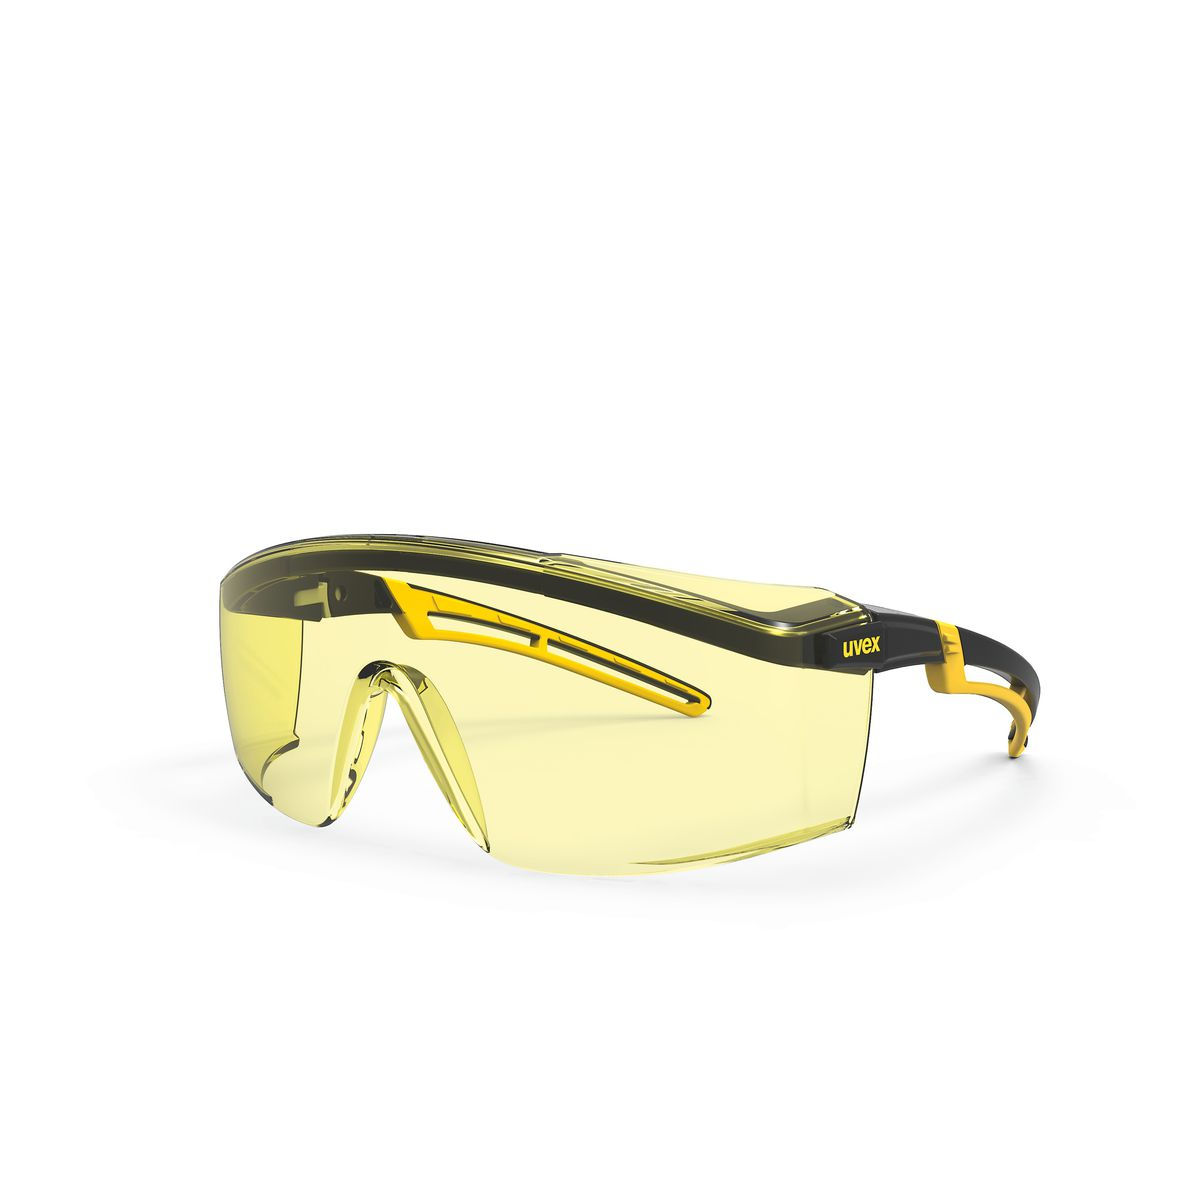 uvex astrospec 2.0 Safety spectacles - Amber